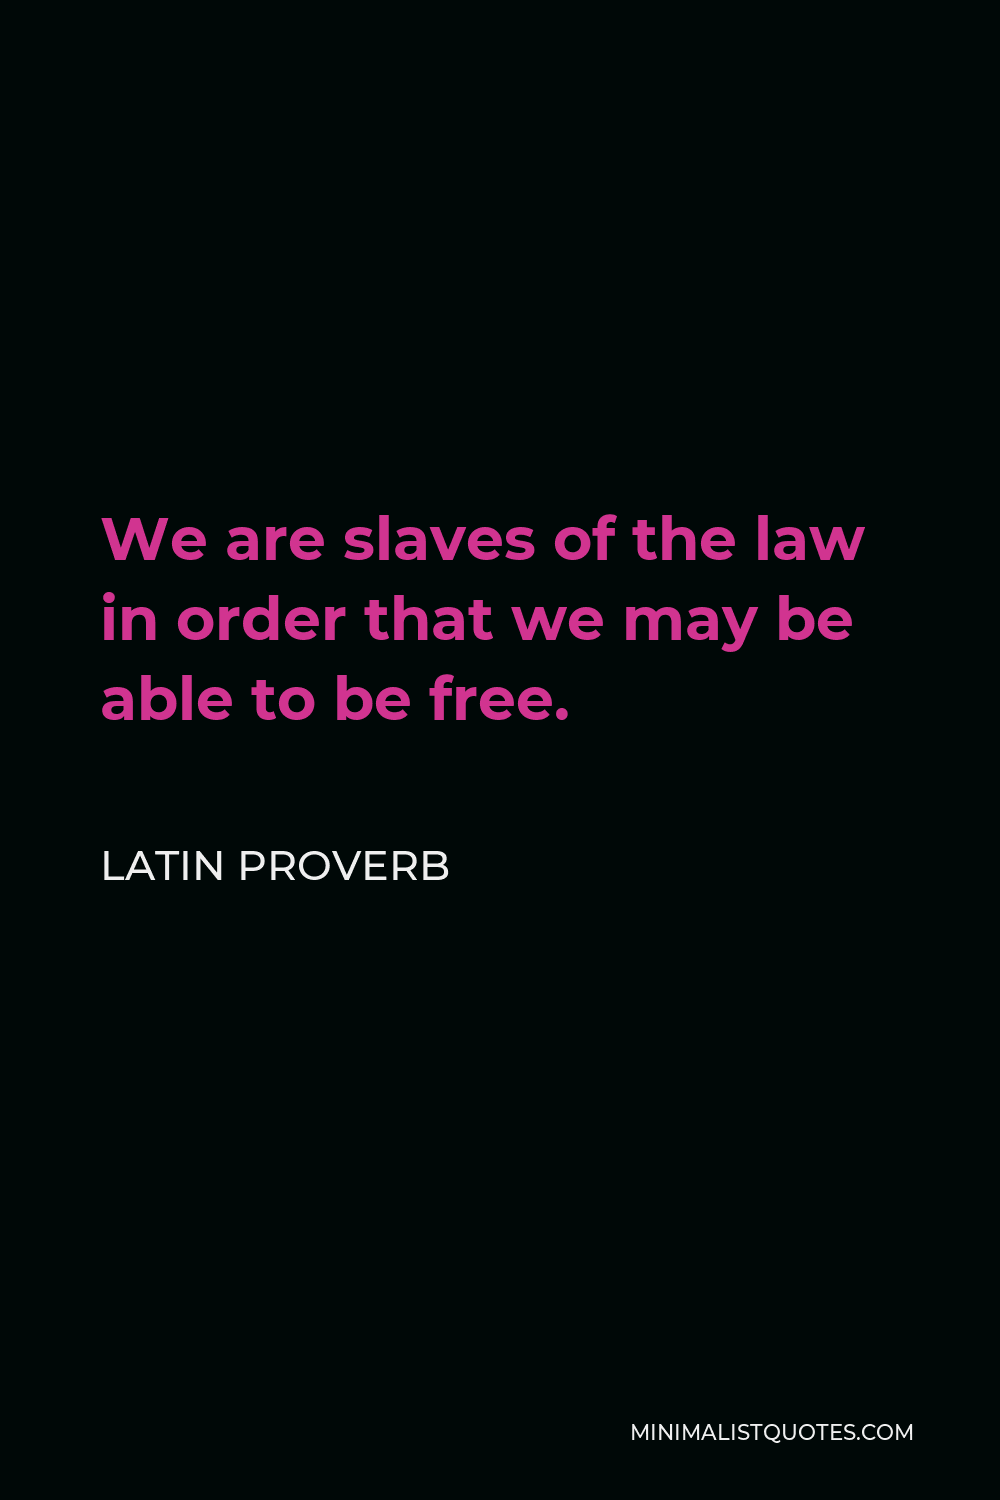 Latin Proverb Quote - We are slaves of the law in order that we may be able to be free.